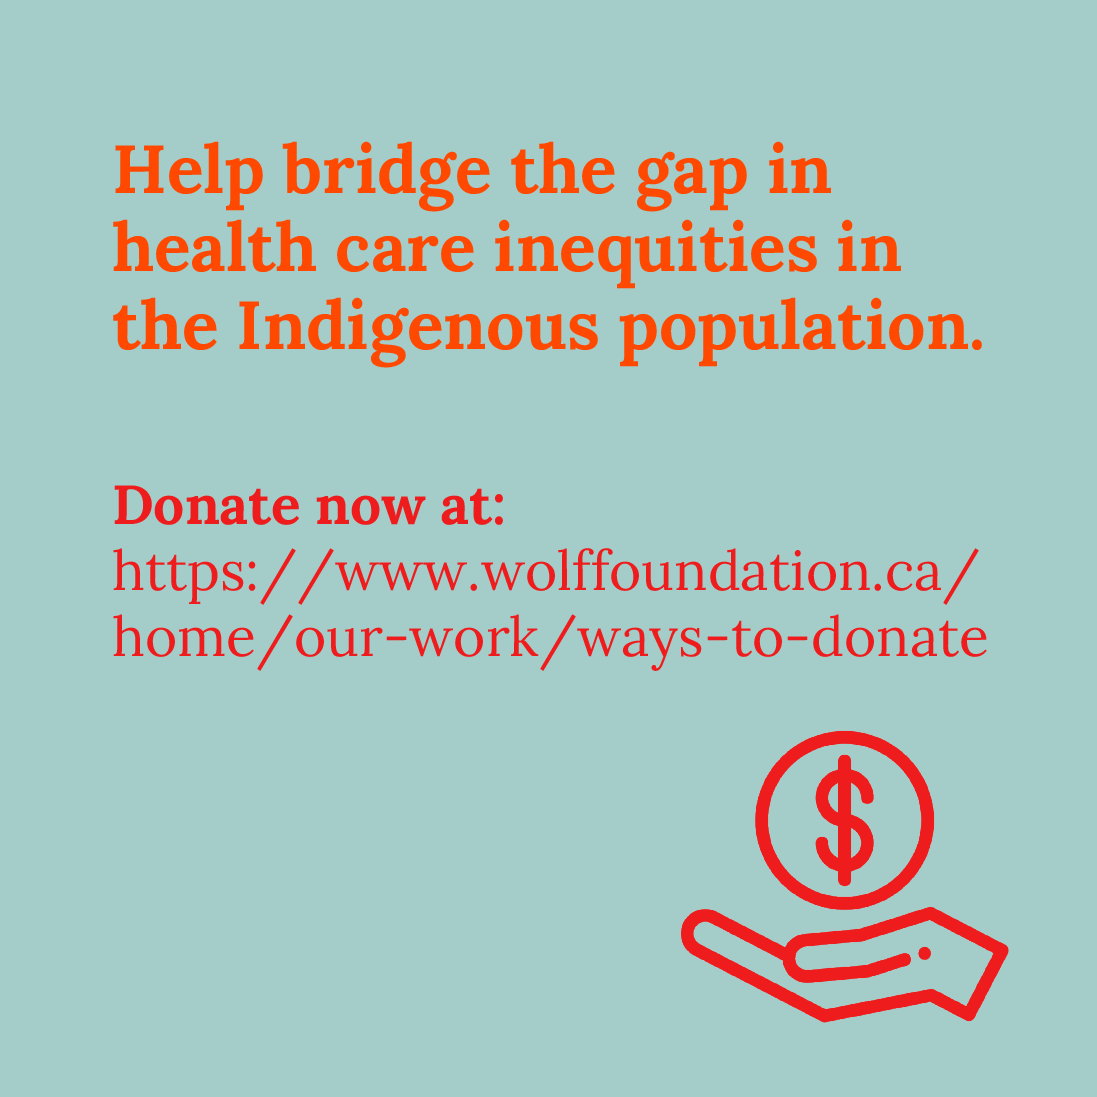 Help provide Indigenous people in Canada the health care they deserve by donating at: wolffoundation.ca/home/our-work/…
Learn more: wolffoundation.ca
#indigenous #indigenoushealth #indigenouscanada #indigenoushealthcare #healthstatistics #healthcare
Source:ohchr.org/sites/default/…